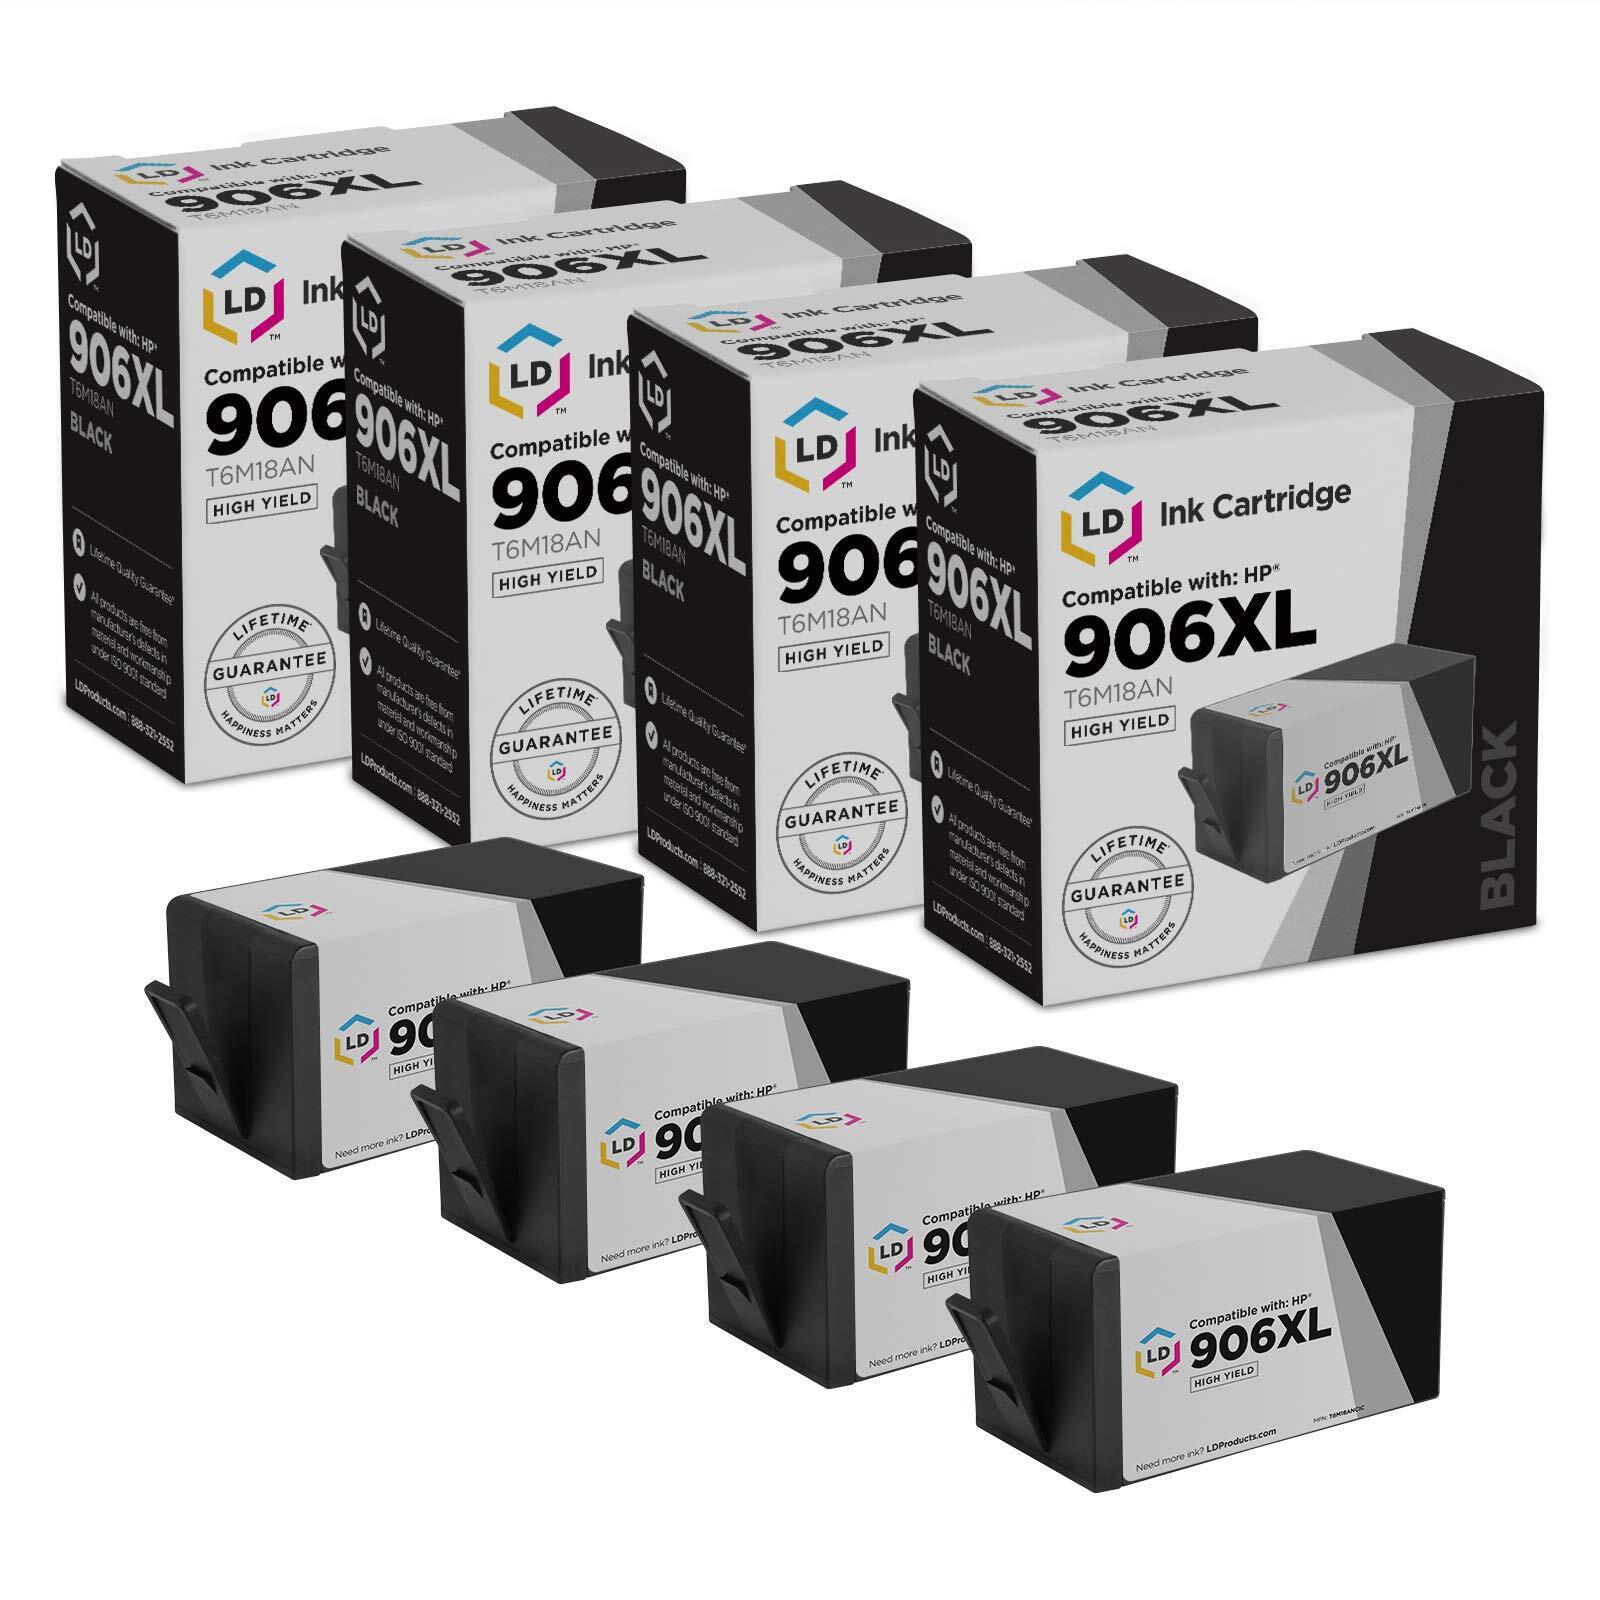 LD Products 4PK Replacement for HP 906XL 902XL Extra HY Black Ink Cartridges